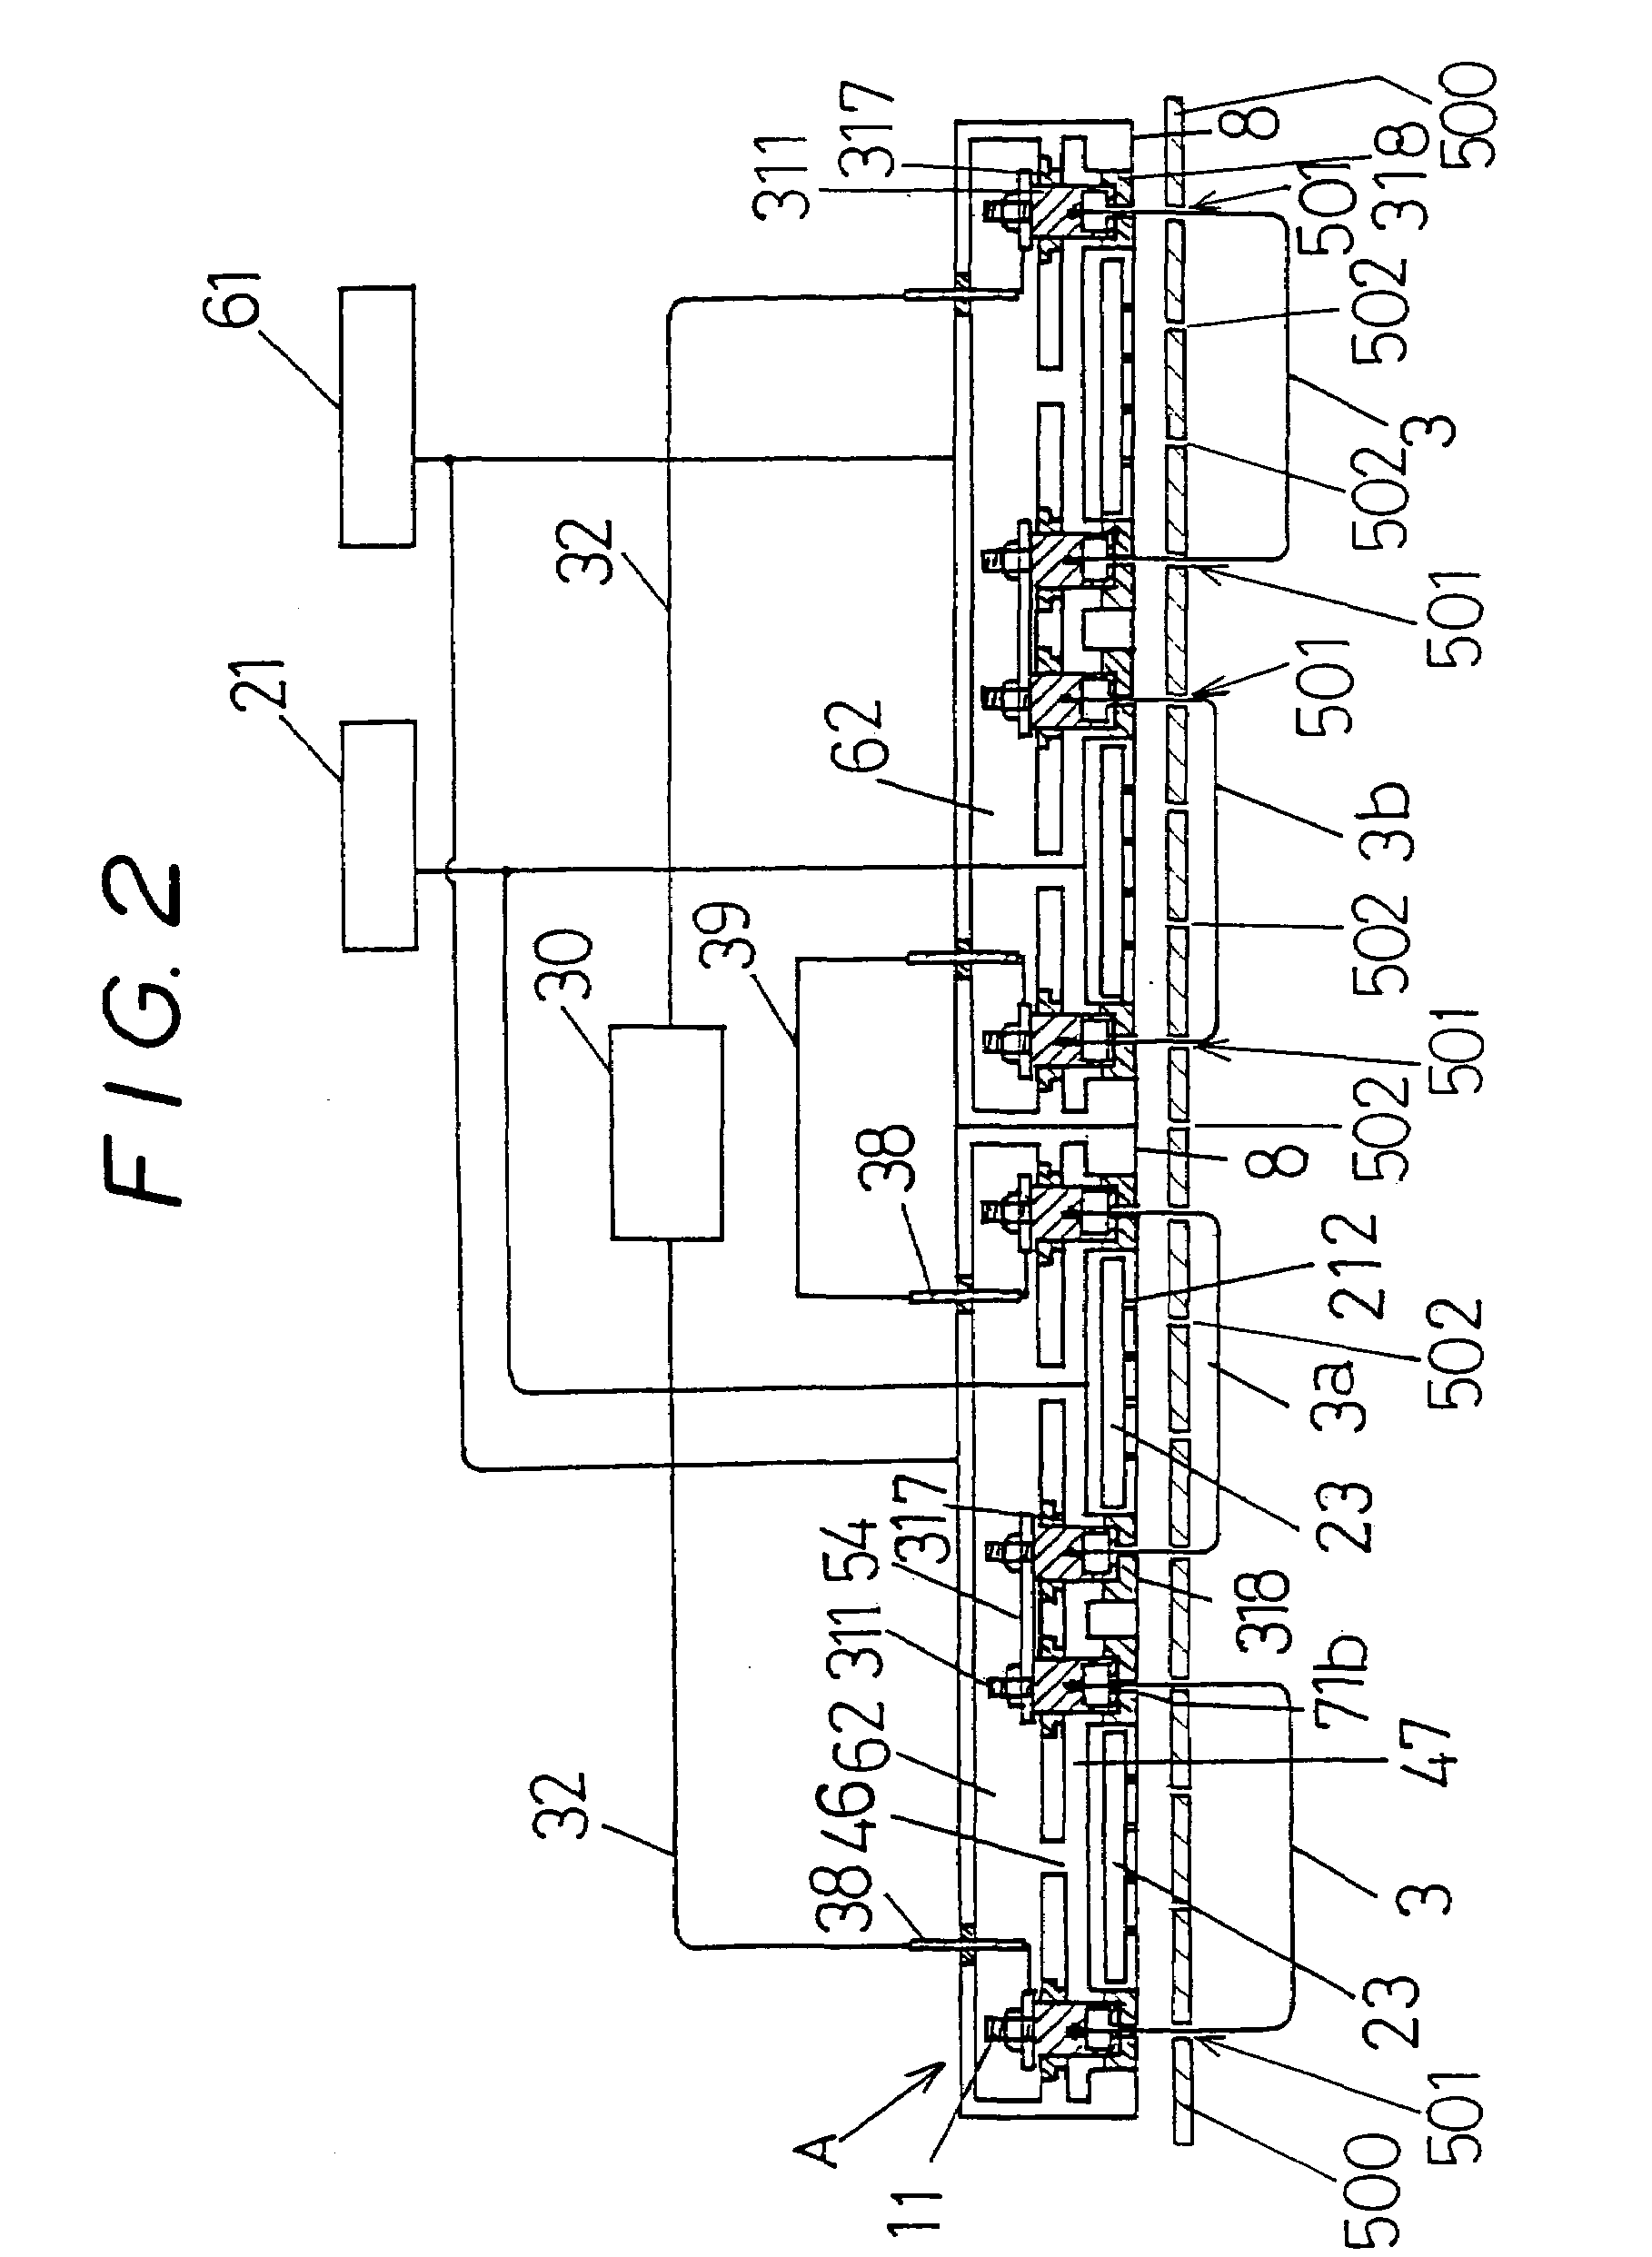 Heating element CVD system and connection structure between heating element and electric power supply mechanism in the heating element CVD system